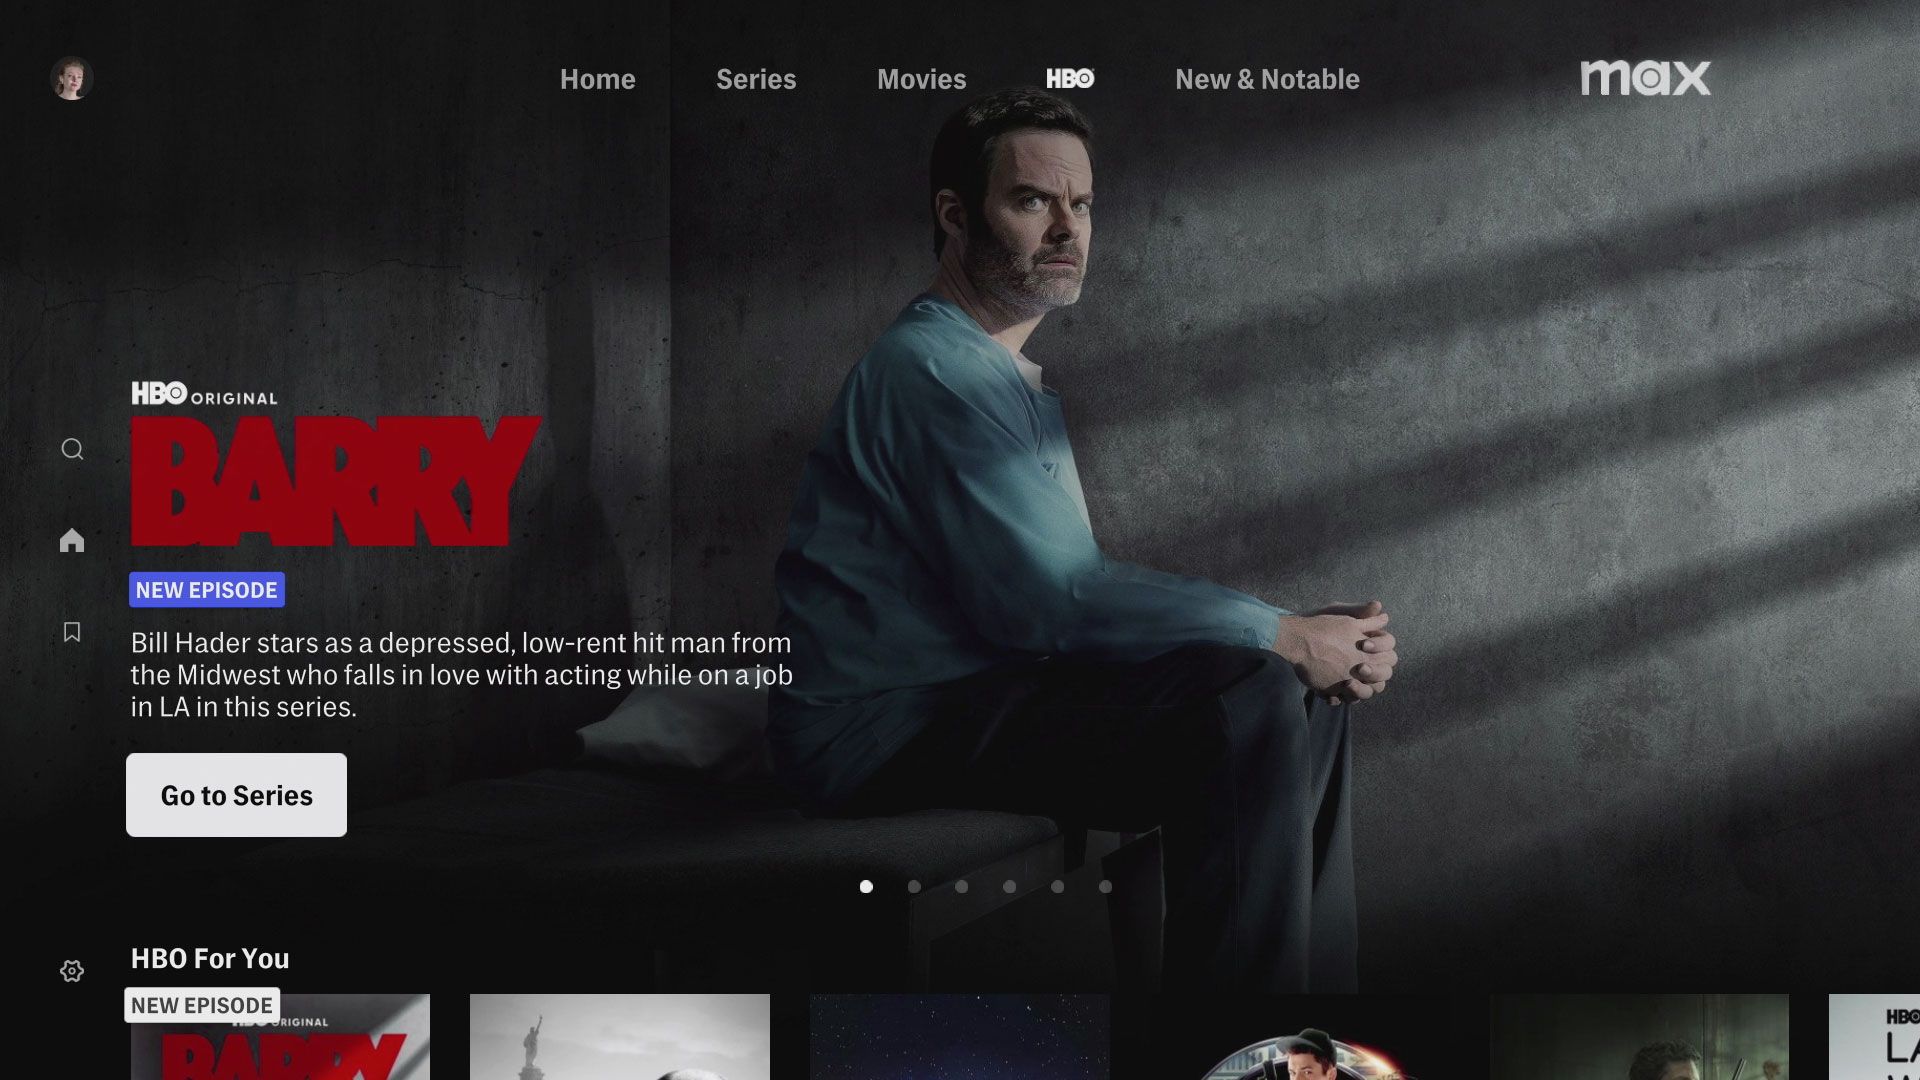 HBO Max Changes to Max Next Month With New Features, New Plan - CNET